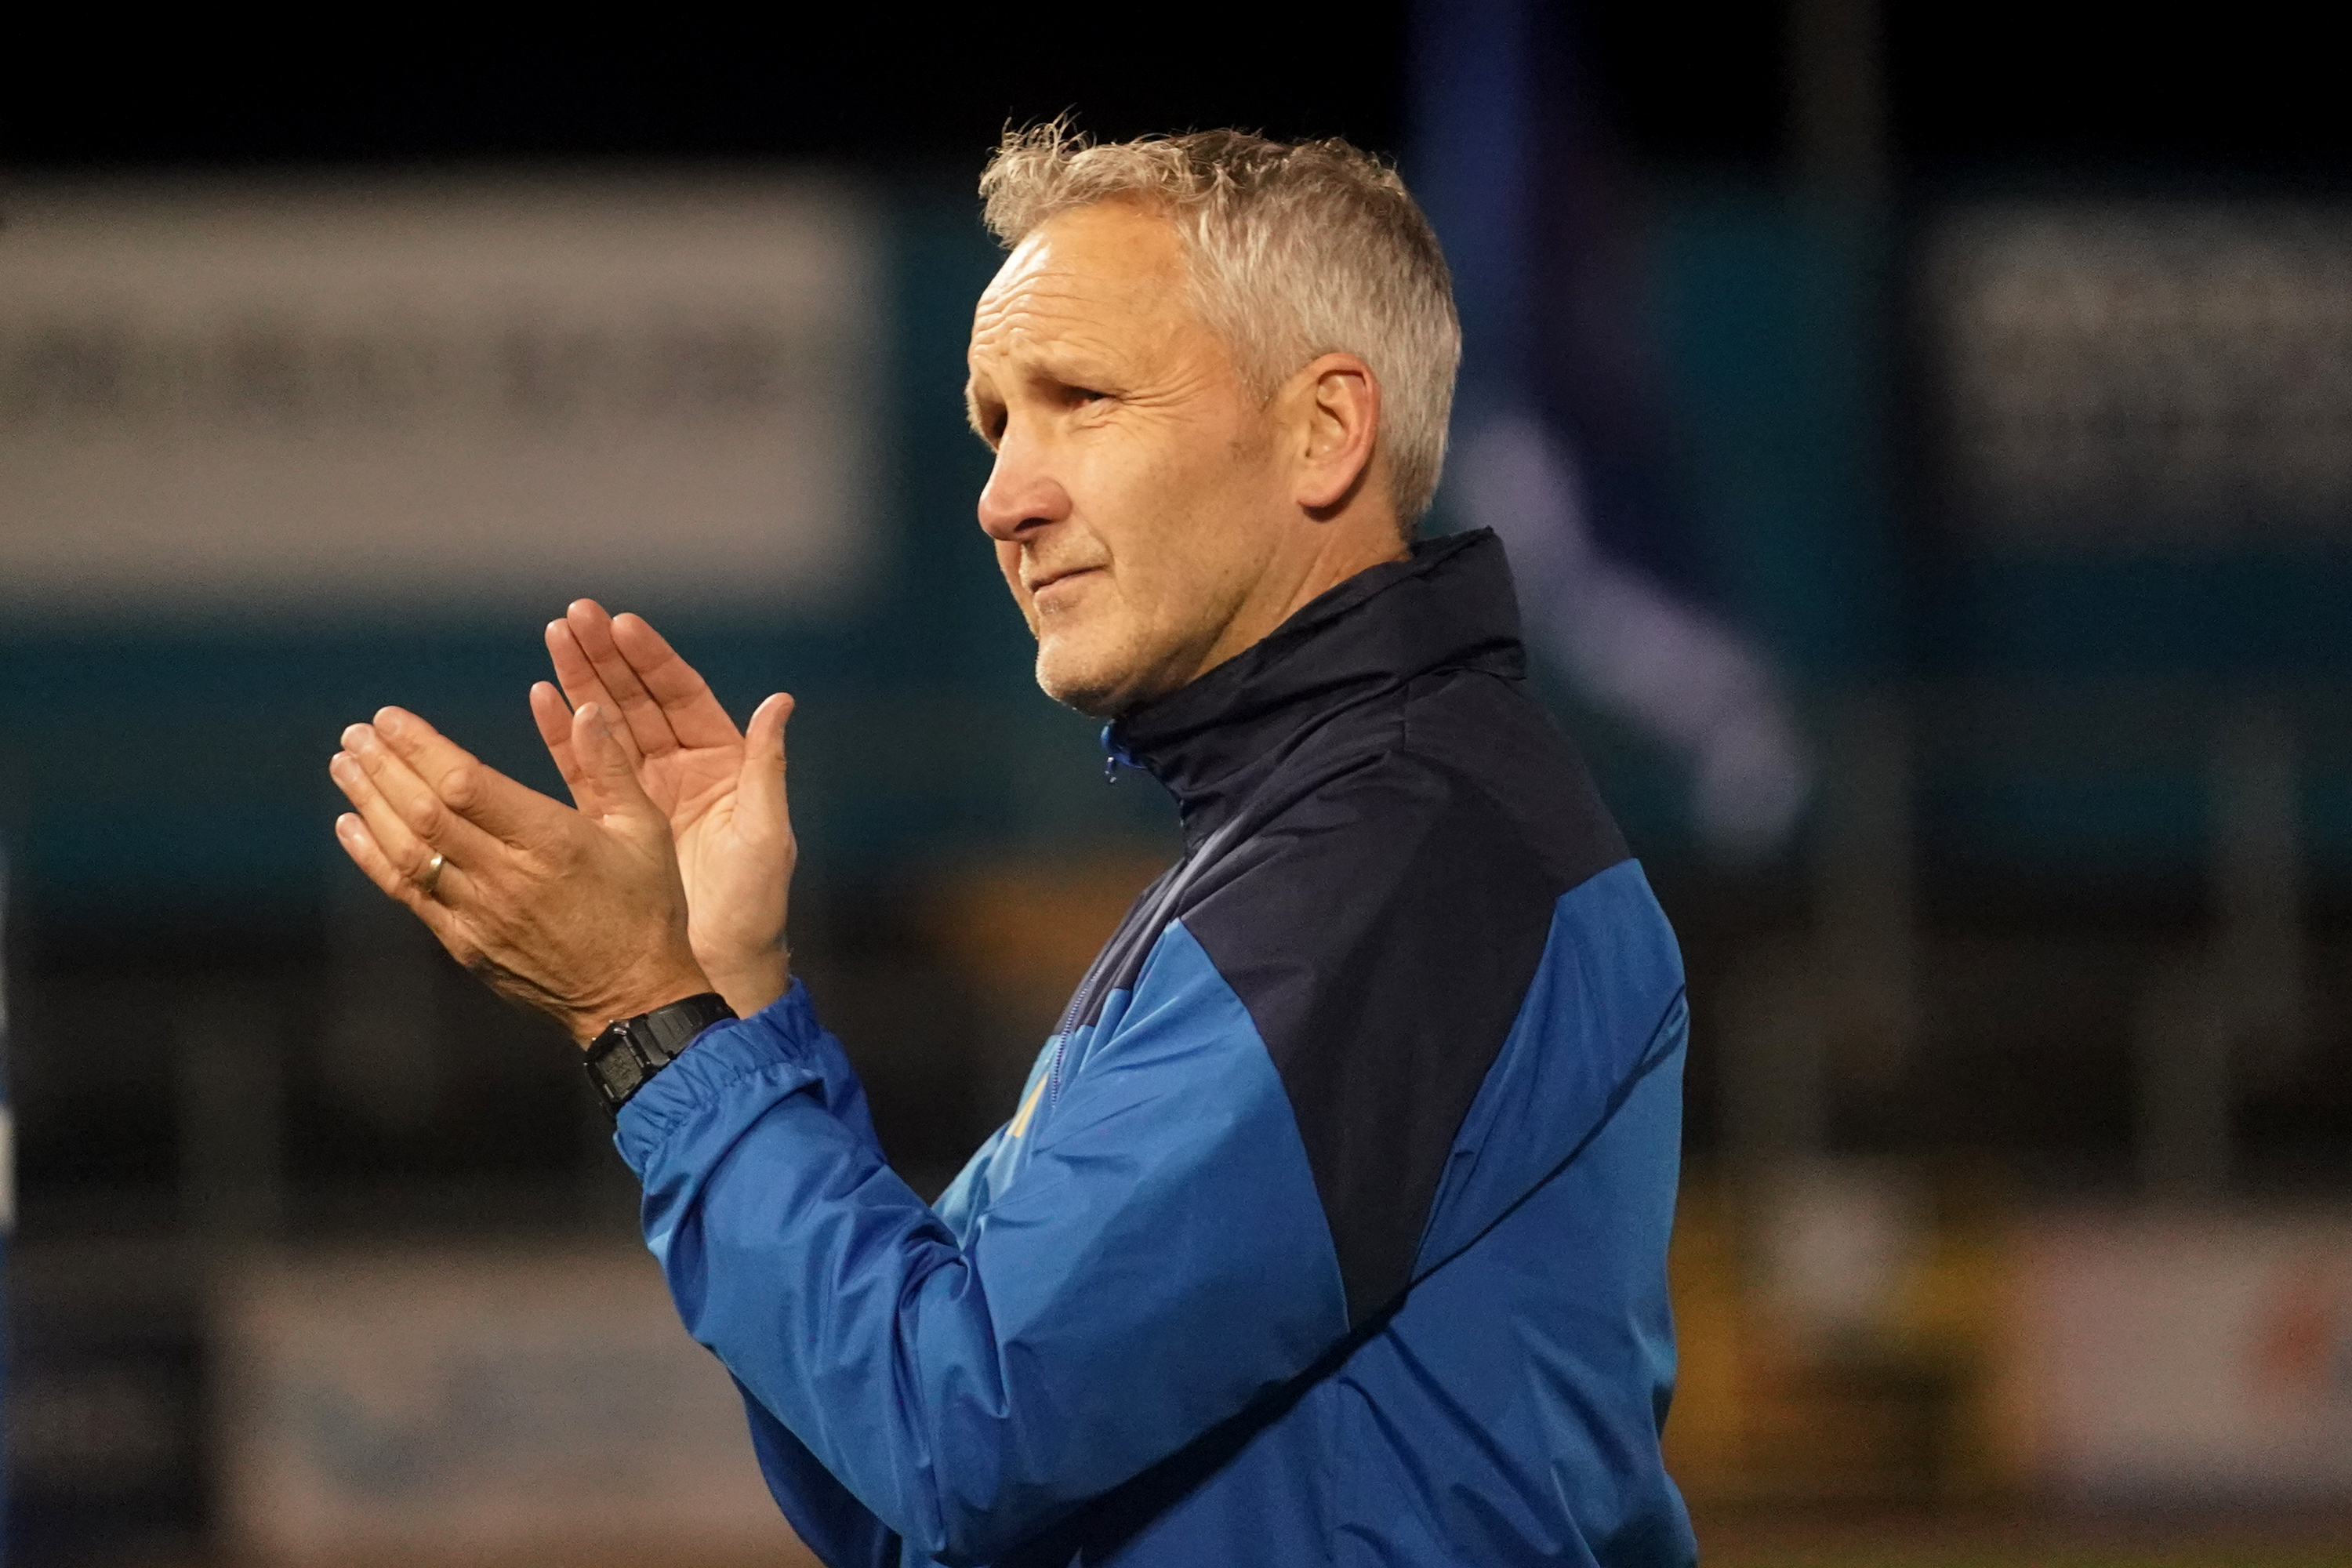 Keith Millen on fans' frustrations